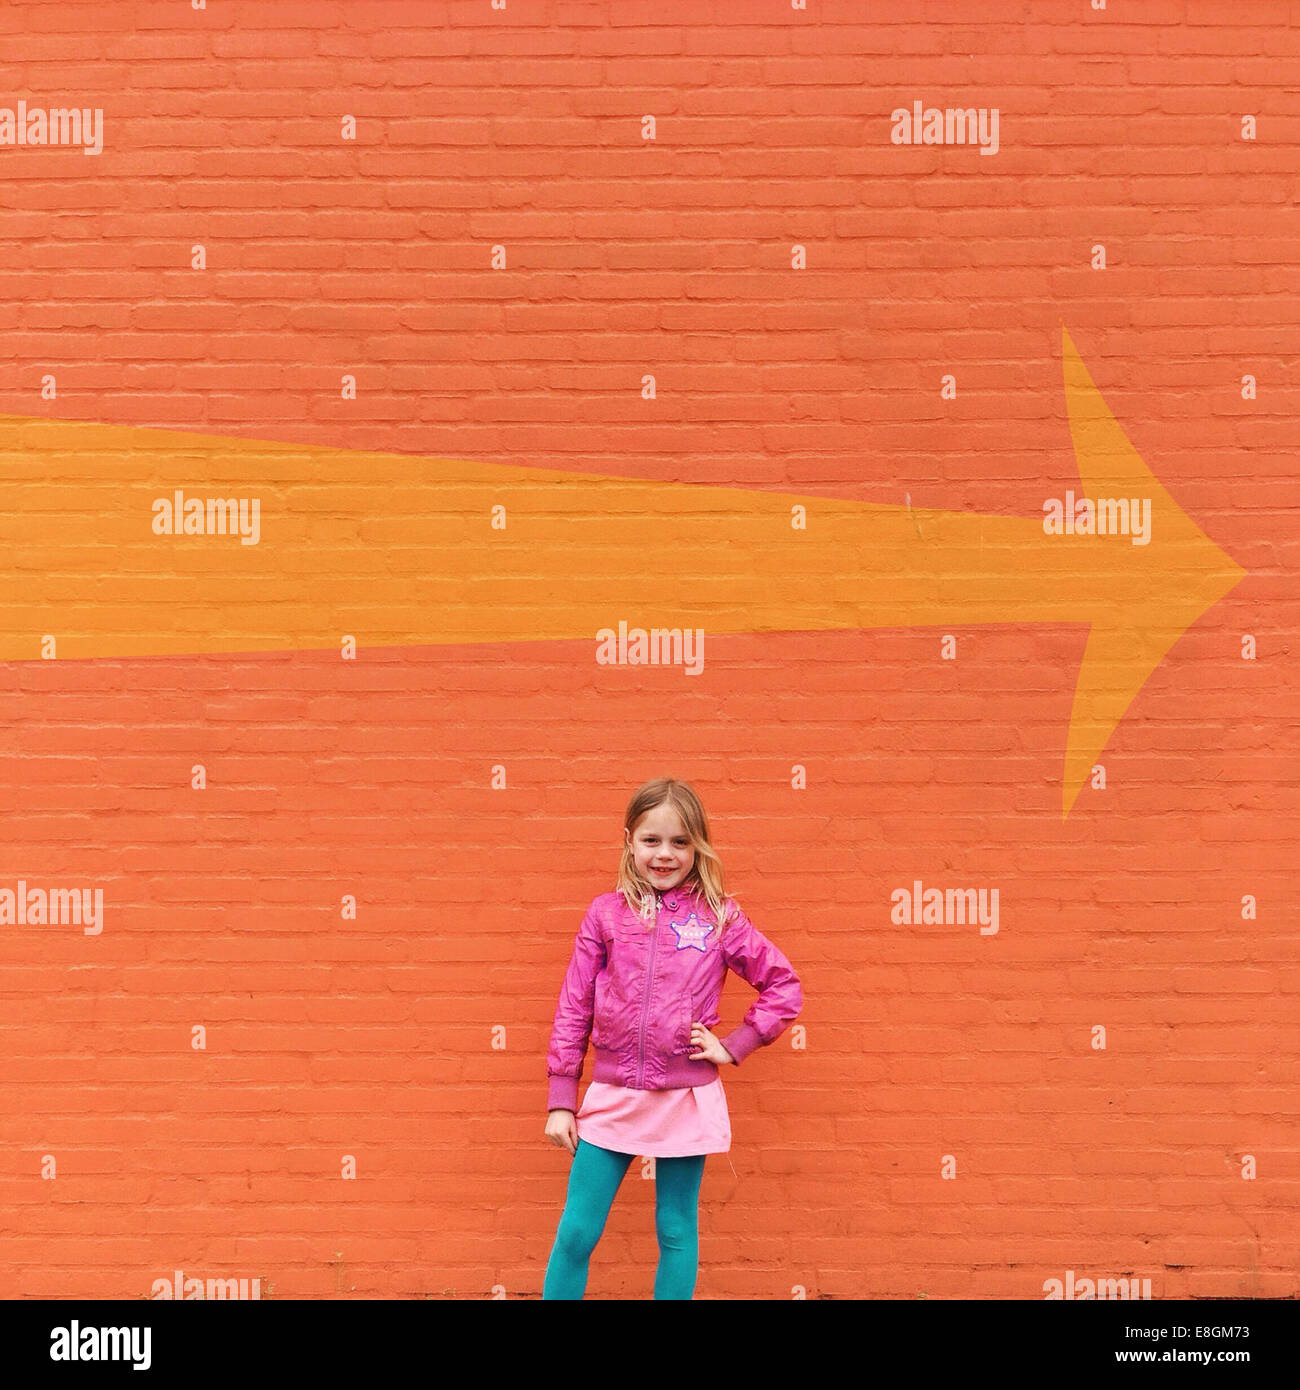 Girl standing in front of orange wall and a directional arrow Stock Photo